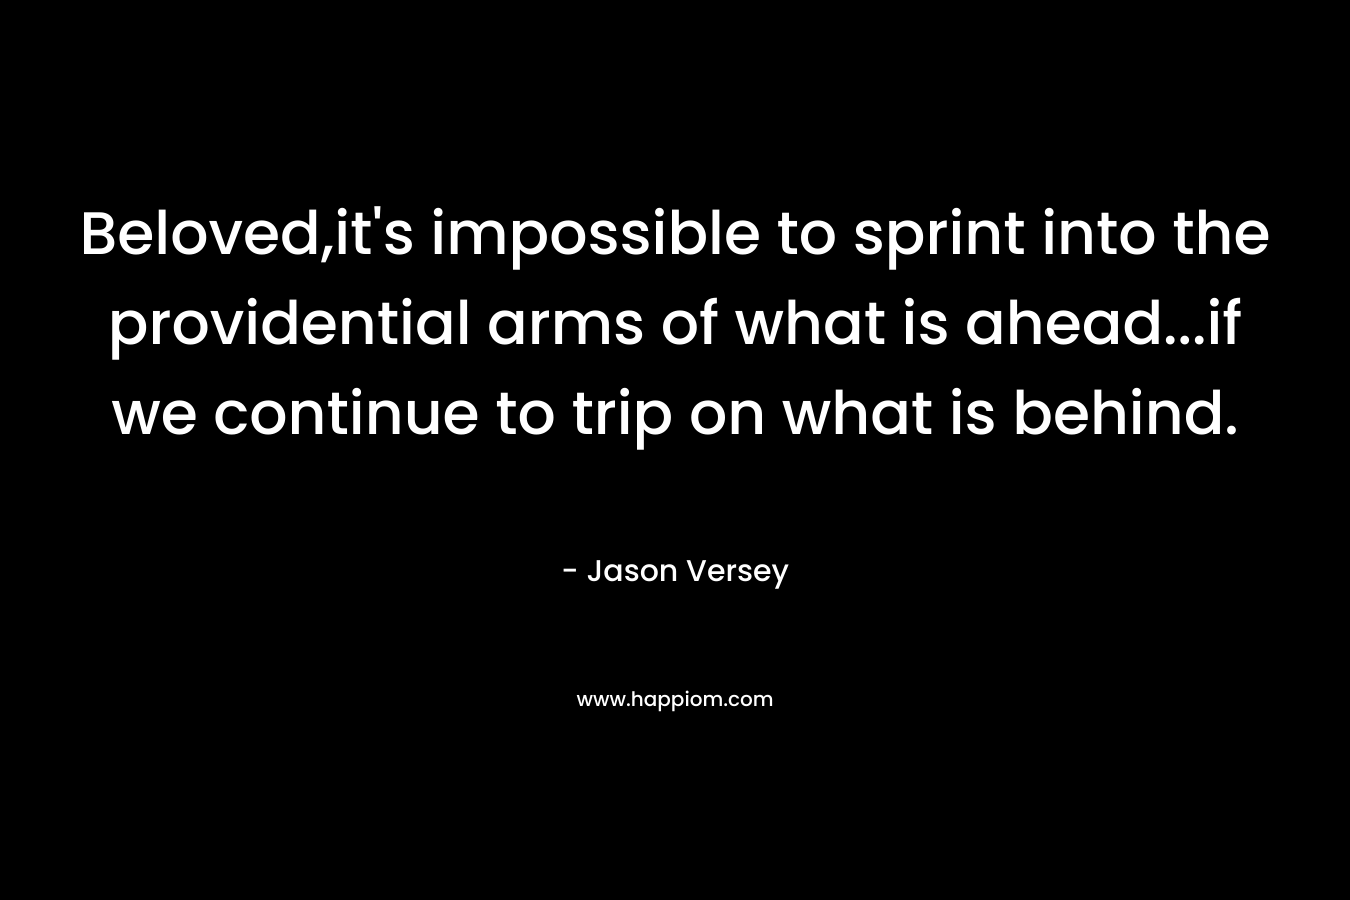 Beloved,it’s impossible to sprint into the providential arms of what is ahead…if we continue to trip on what is behind. – Jason Versey